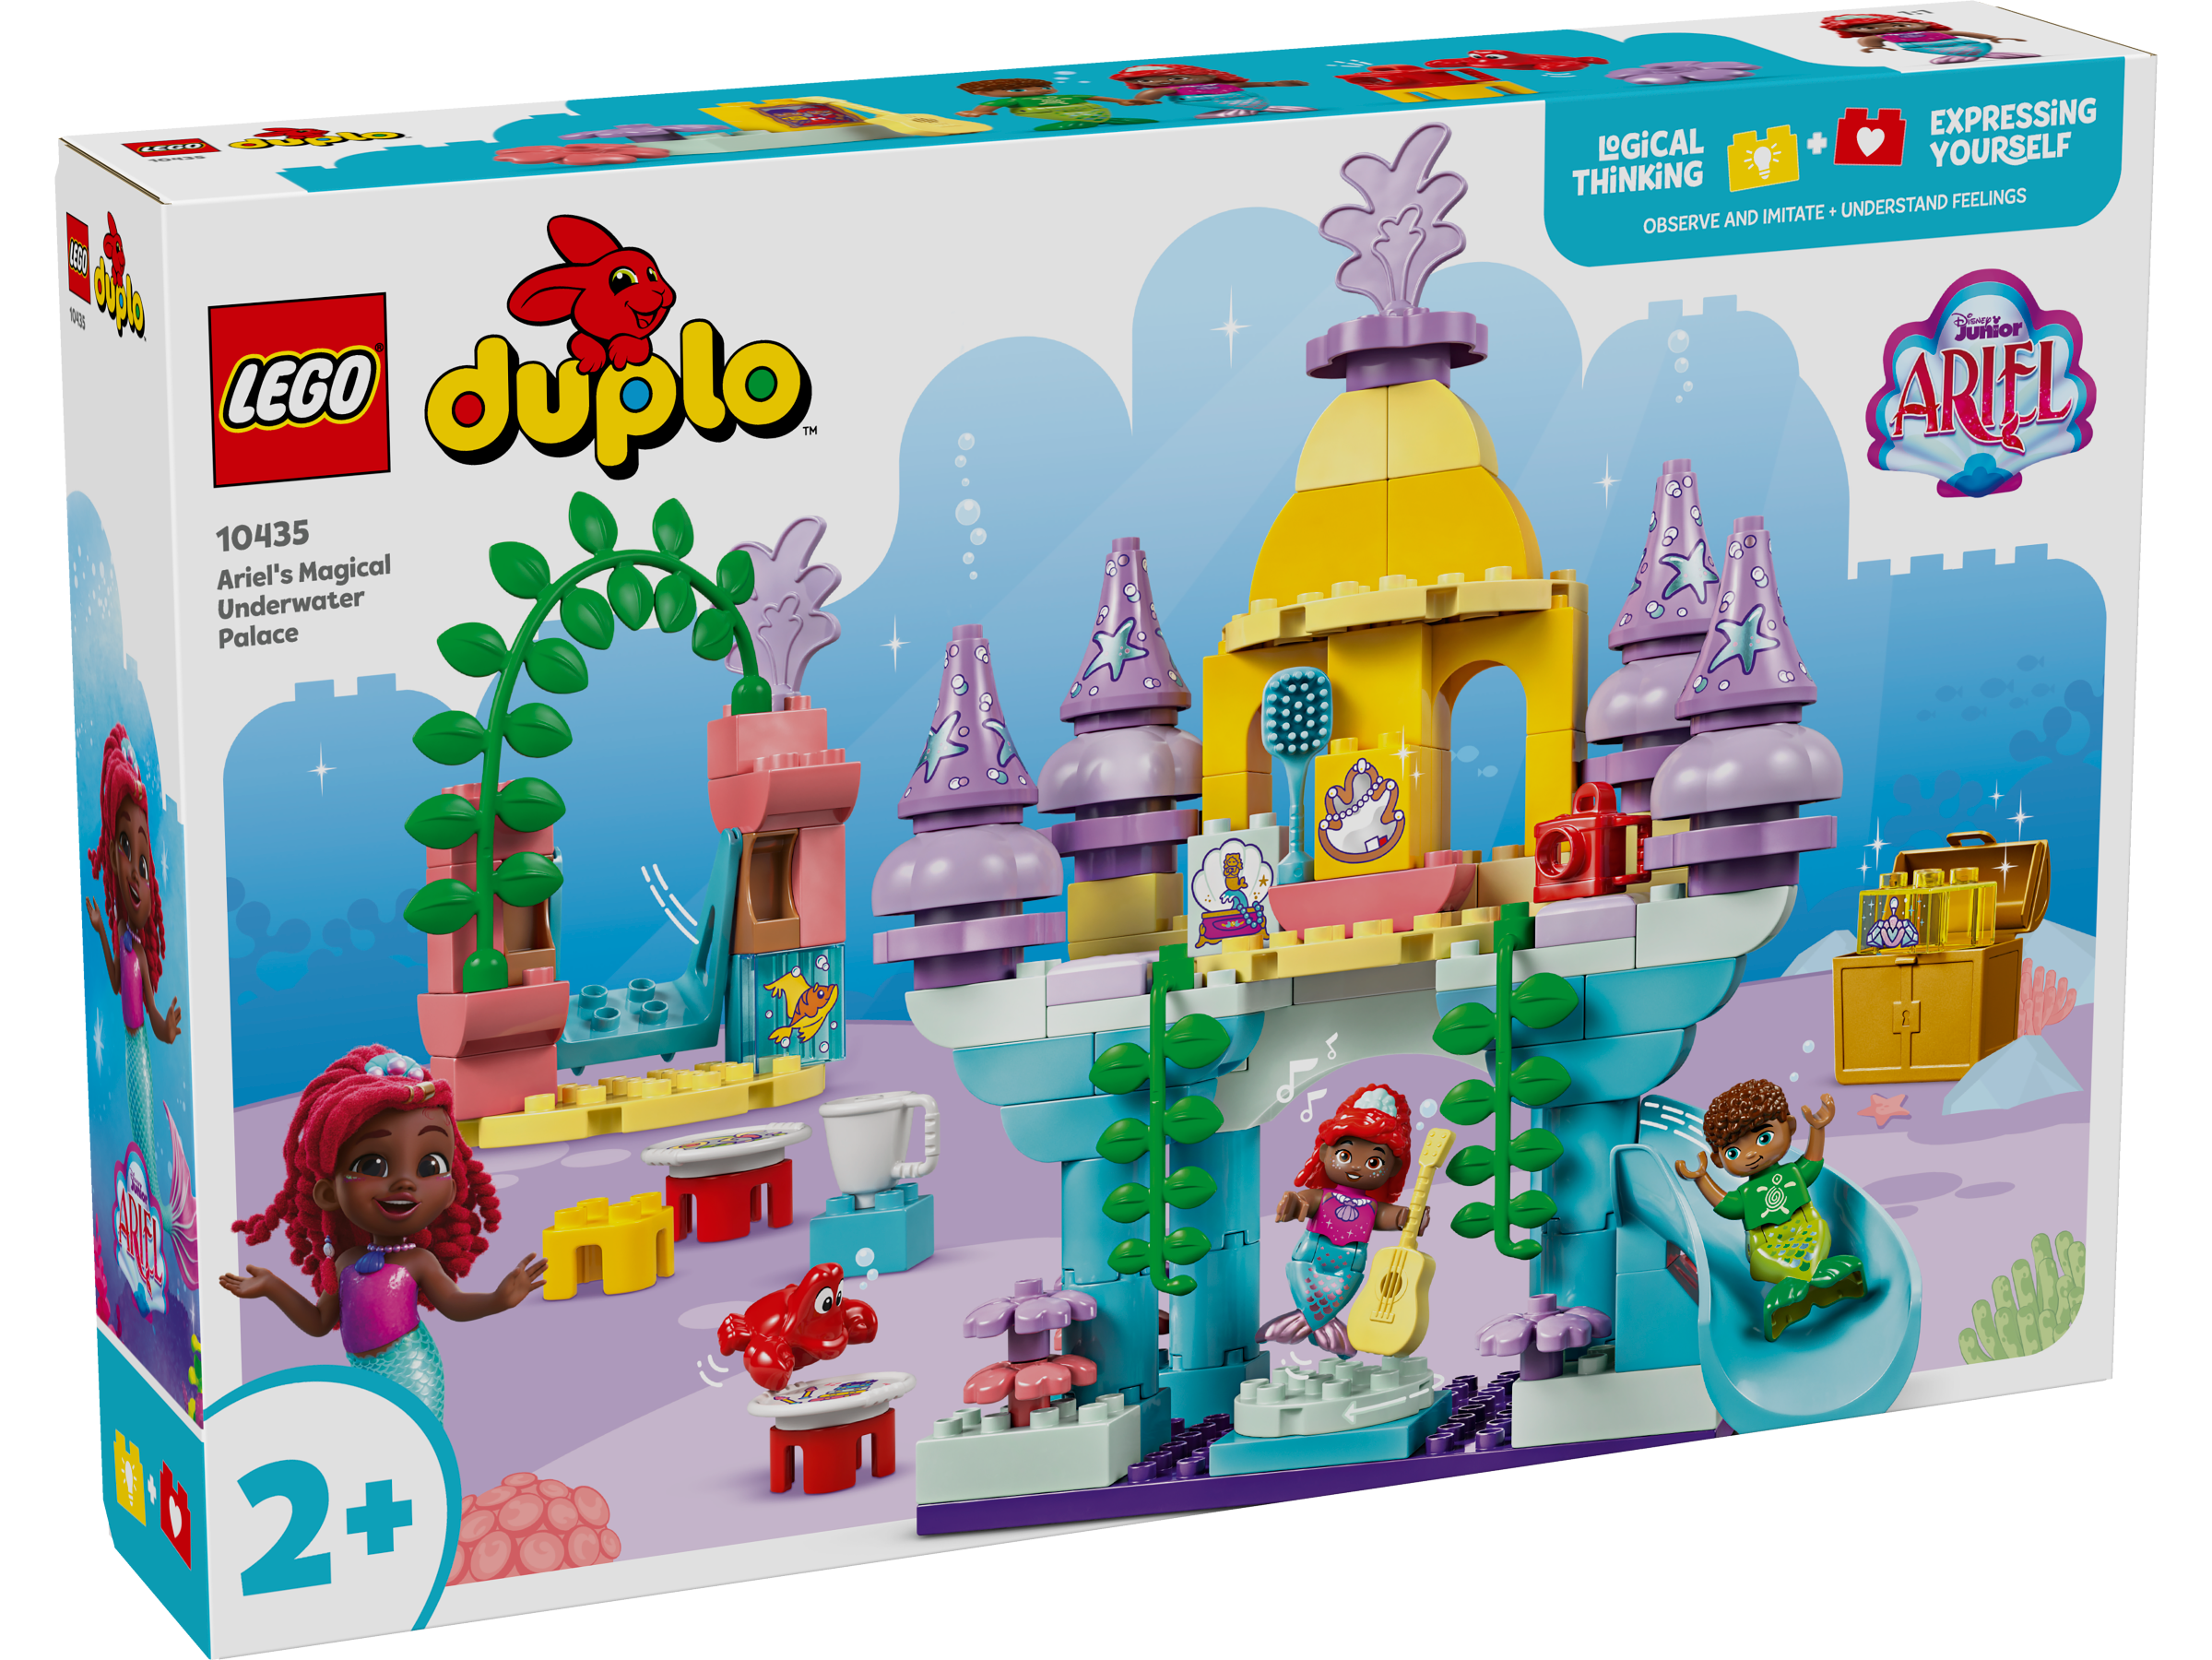 LEGO® DUPLO® 10435 Ariel's Magical Underwater Palace